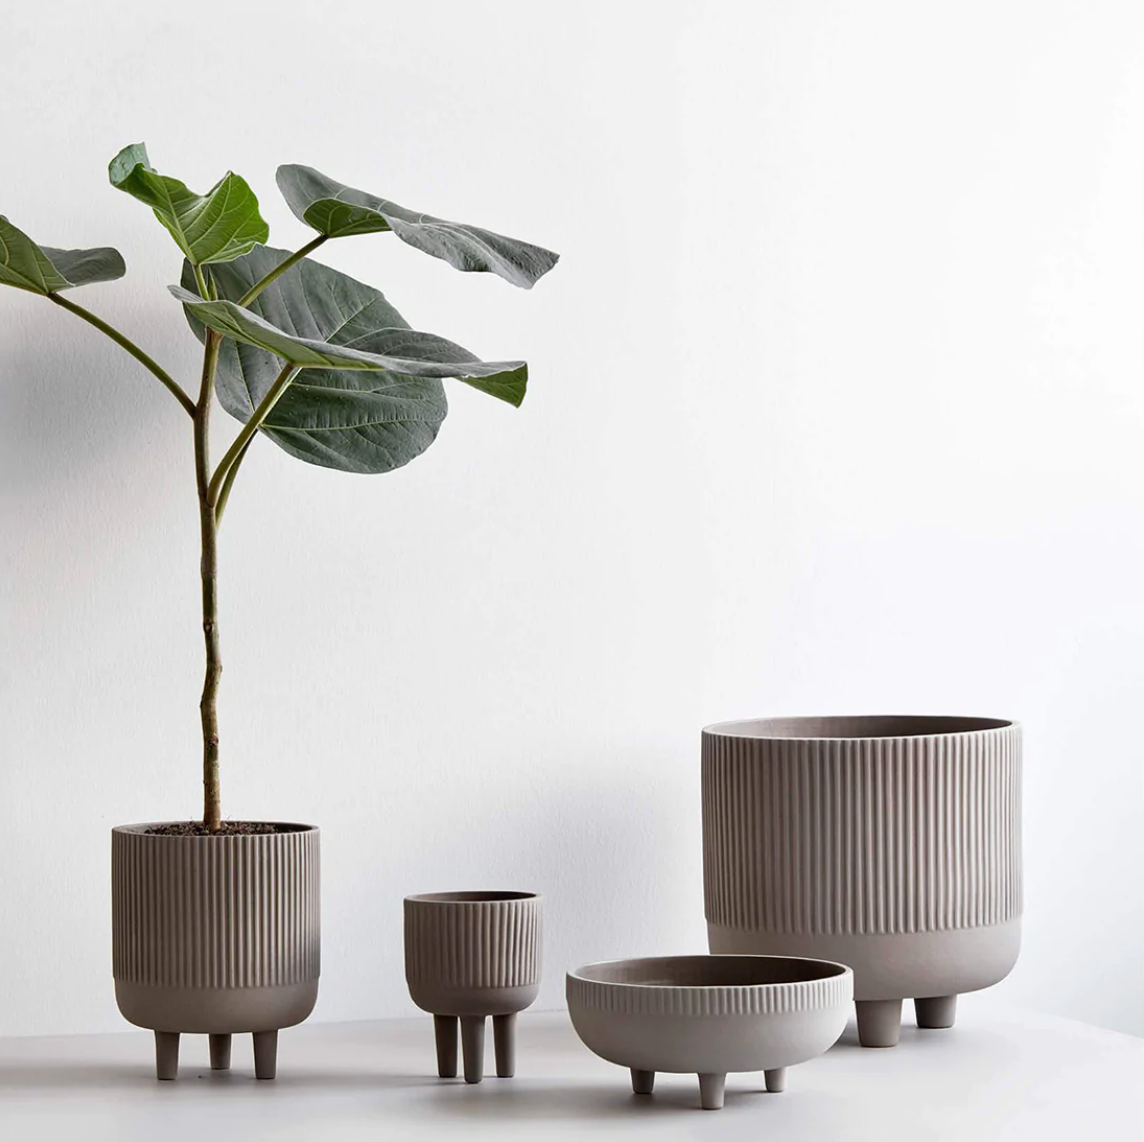 Hygge Bowls and Flower Pots by Kristina Dam in all sizes.